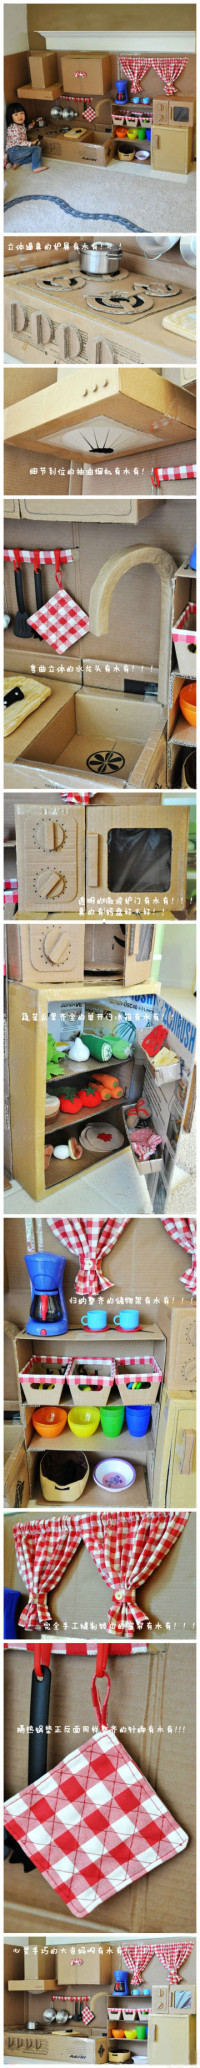 This is a mother handmade cardboard version of mini kitchen, cute